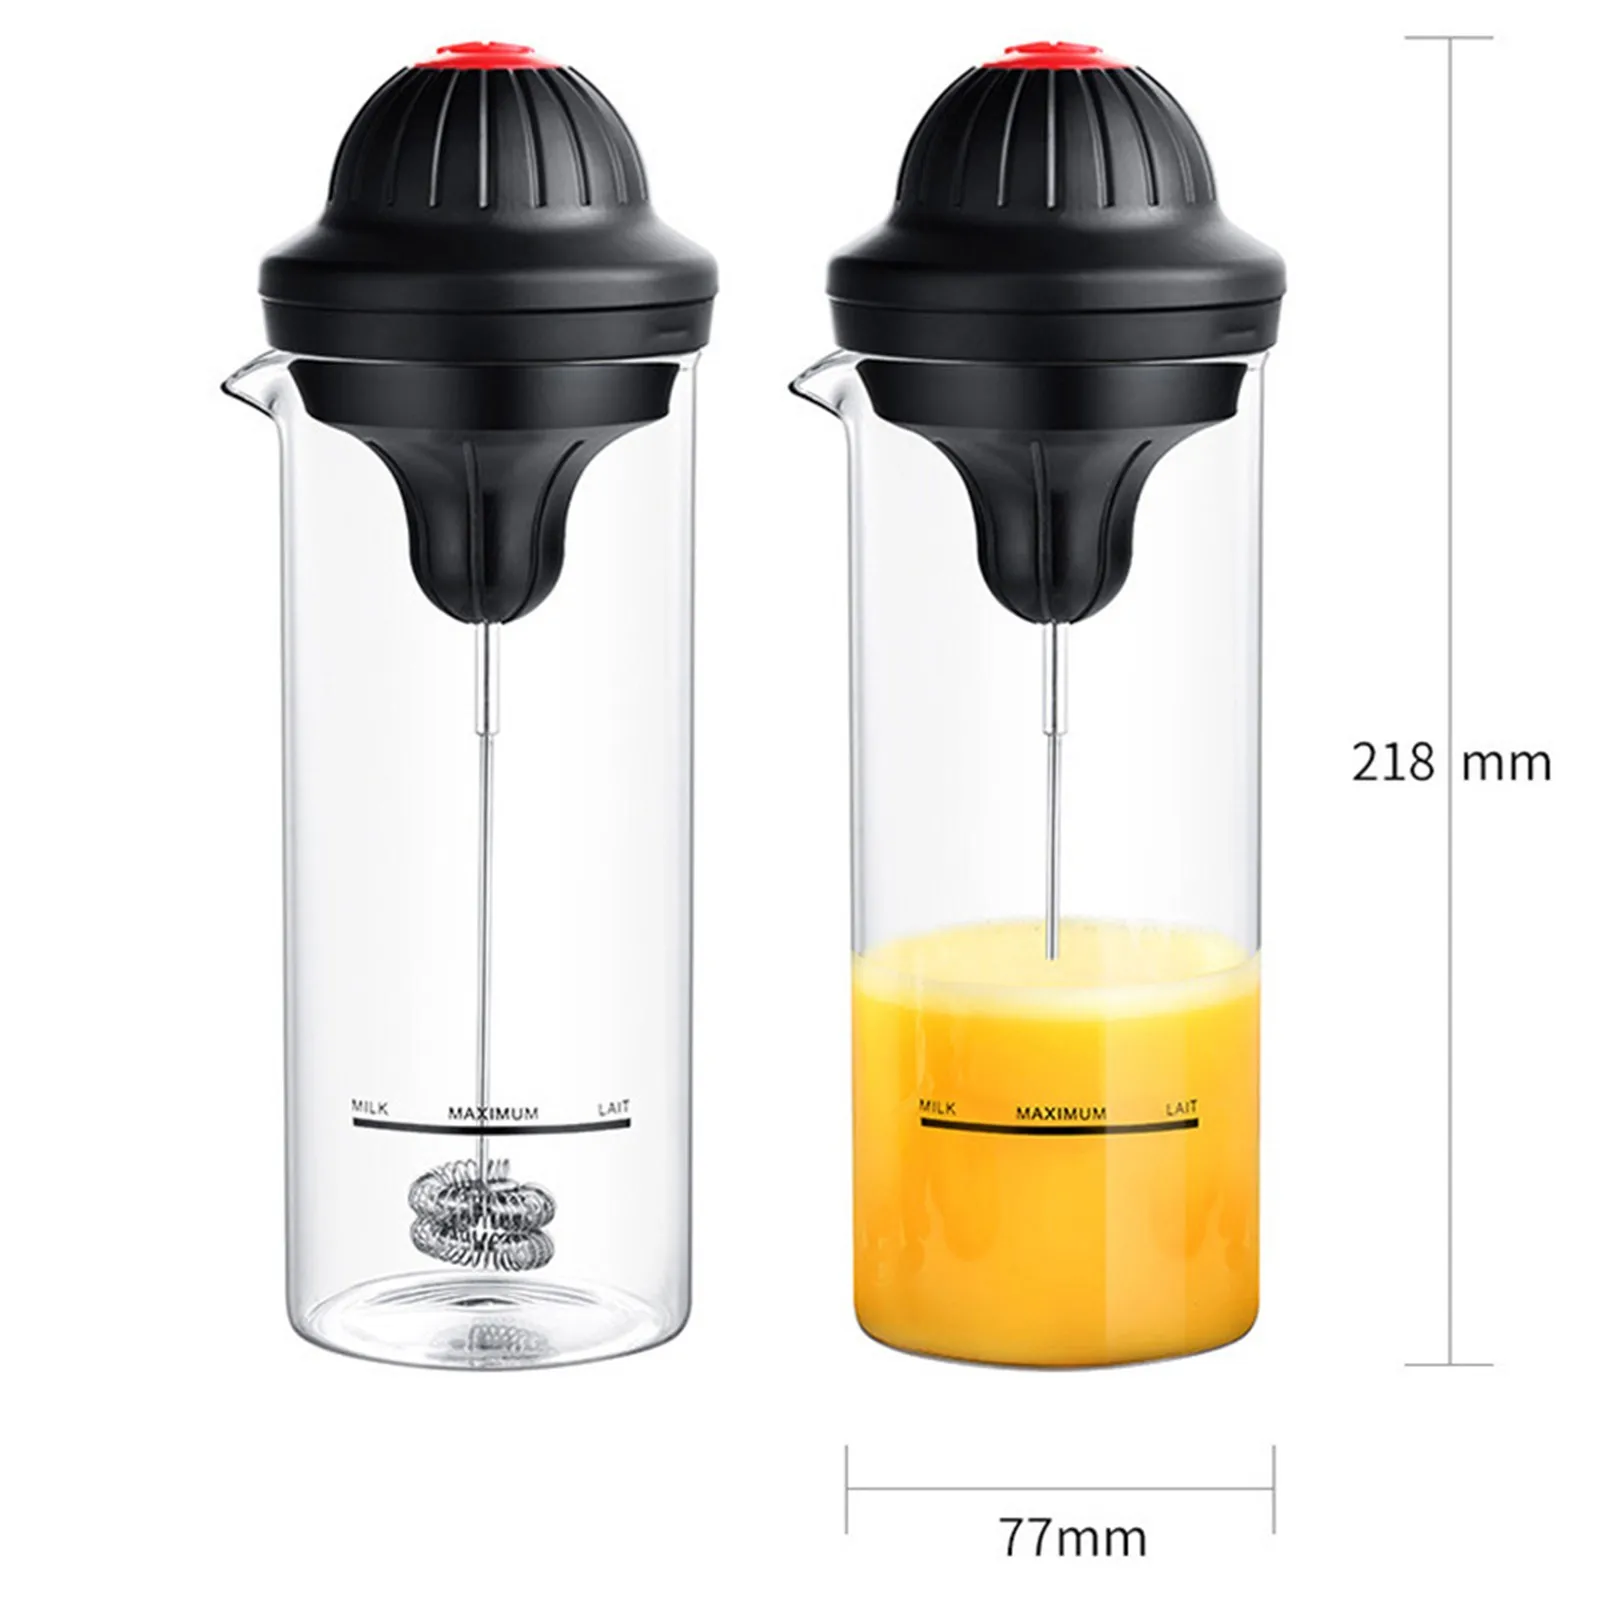 

400ml Electric Milk Bubbler Kitchen Milk Foamer Frother Cup For Coffee Cappuccino Household Portable Automatic Whisk Mixer